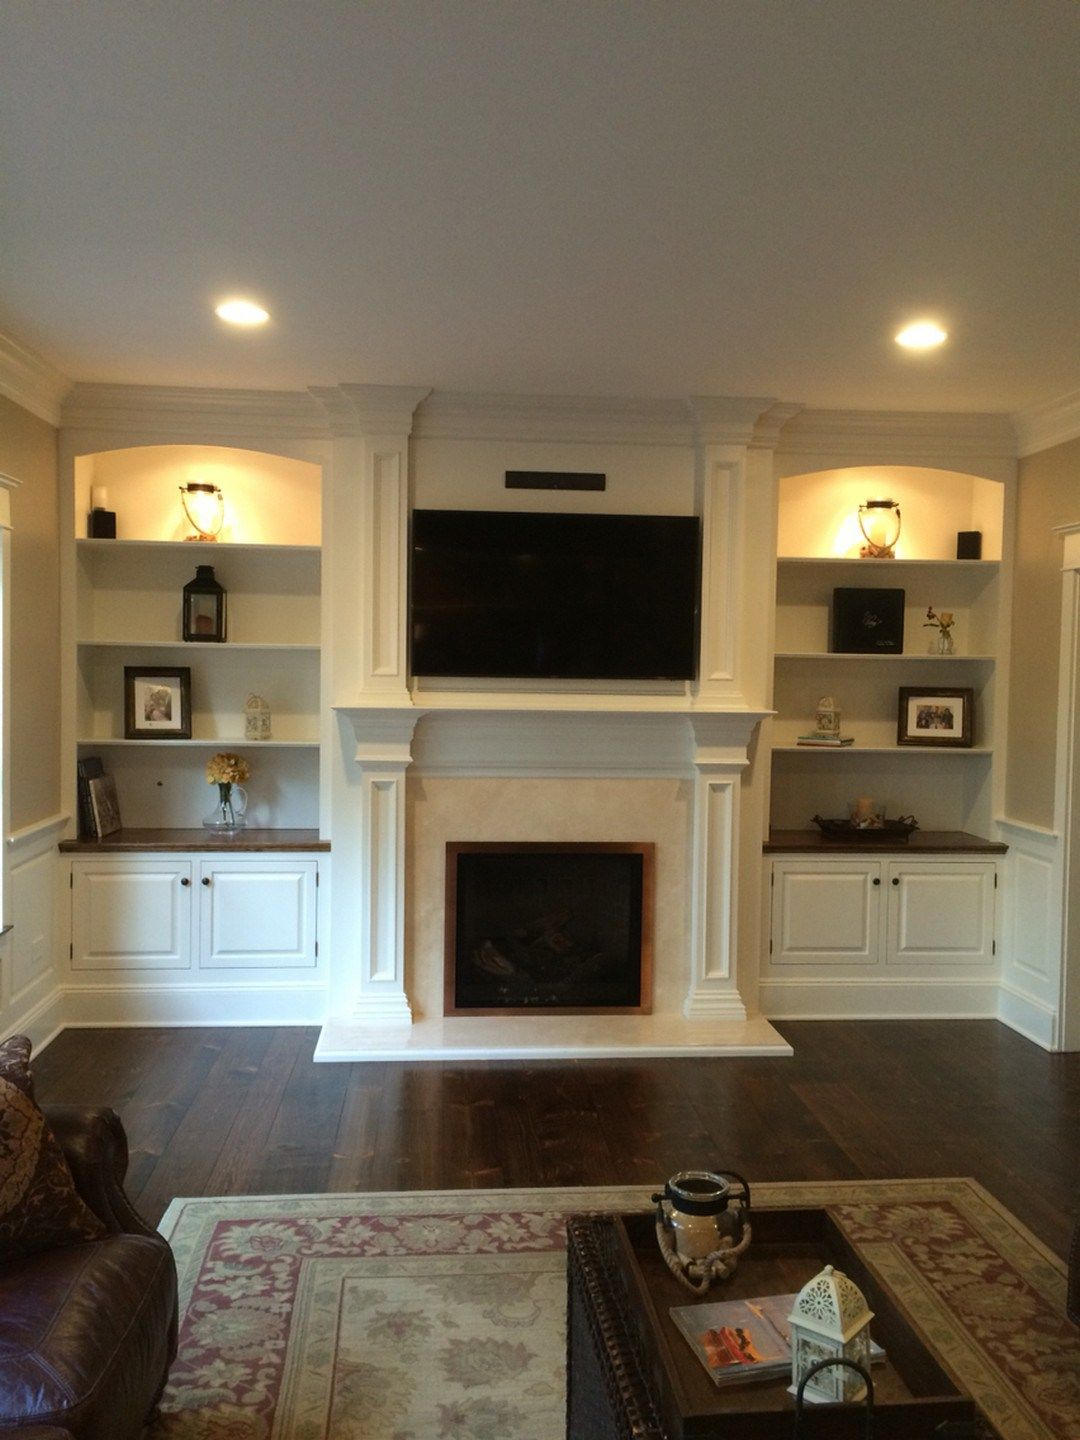 Awesome Built In Cabinets Around Fireplace Design Ideas 4 regarding proportions 1080 X 1440